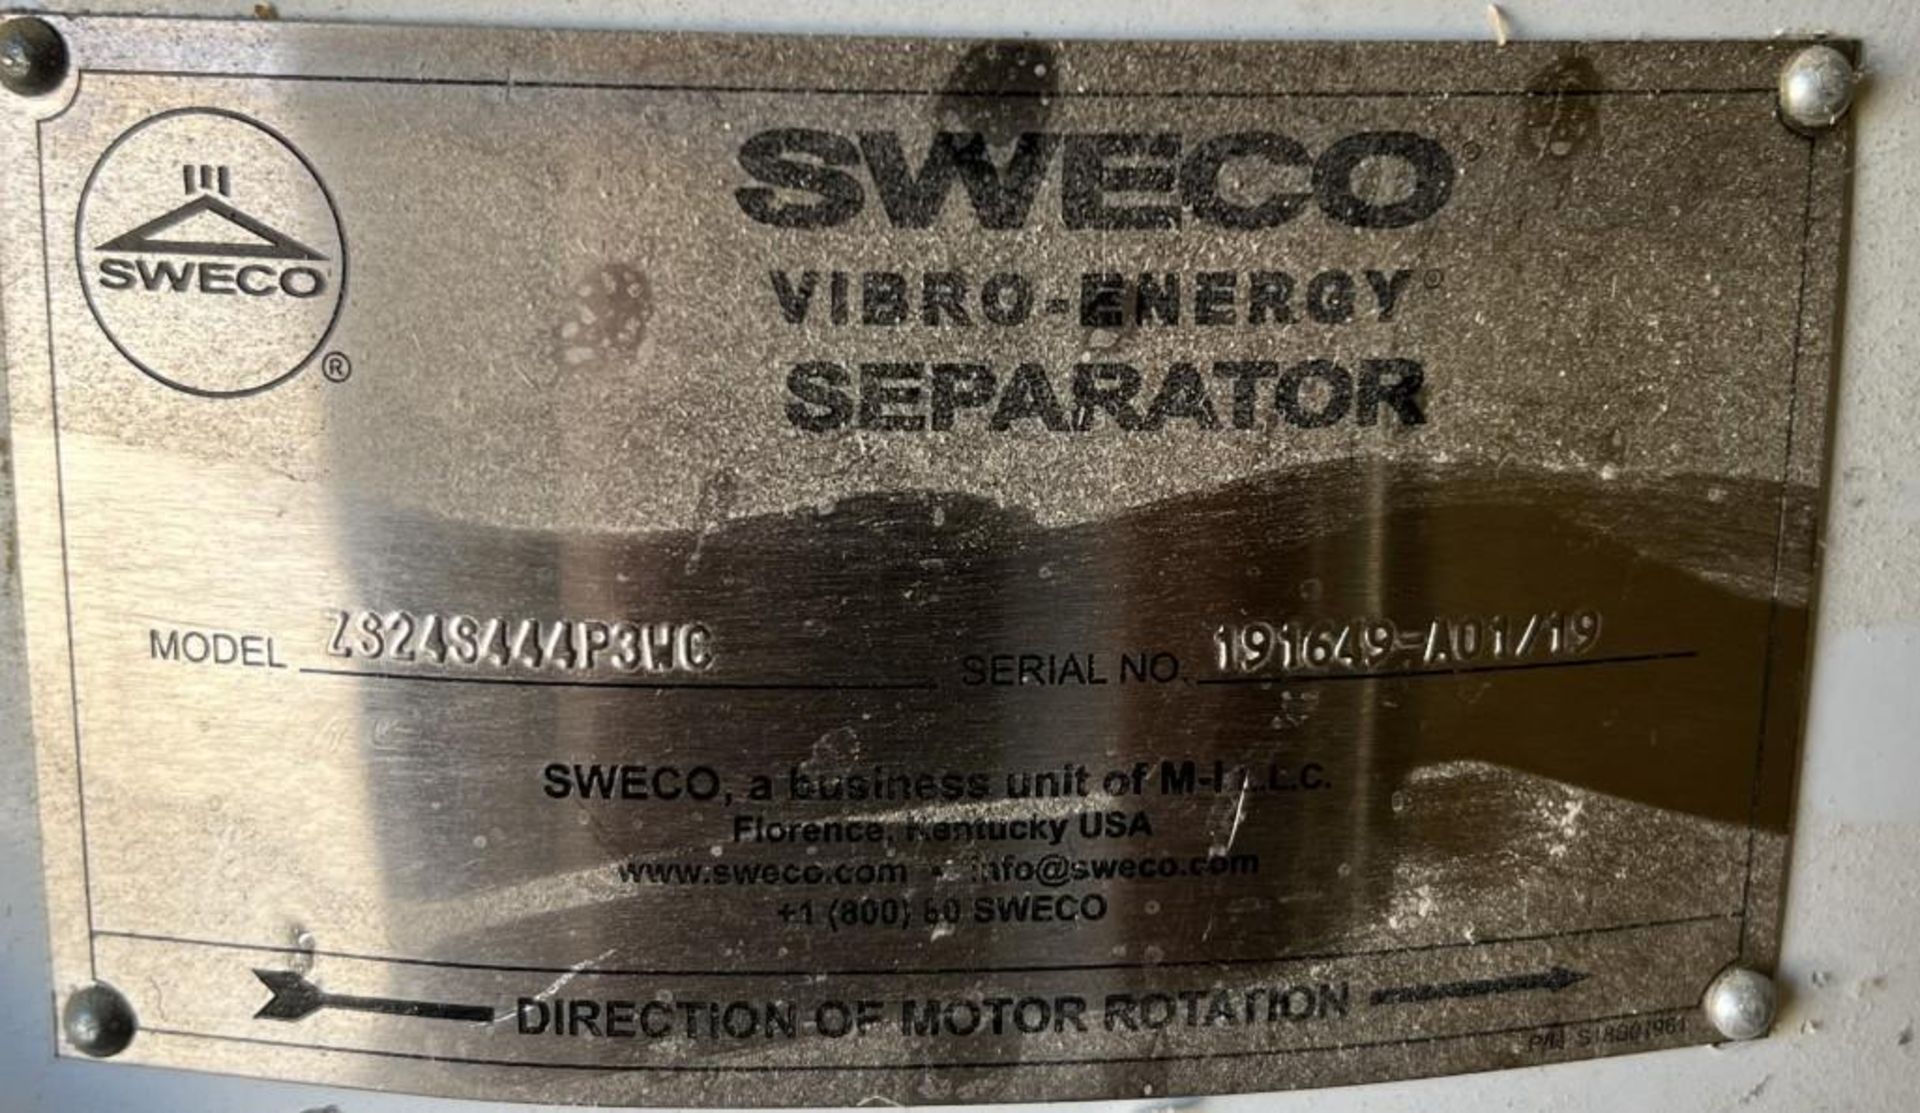 Sweco Vibro-Energy Stainless Steel Separator, Model ZS24S444P3WC, Serial# 191649-A01/19. With Leeson - Image 8 of 9